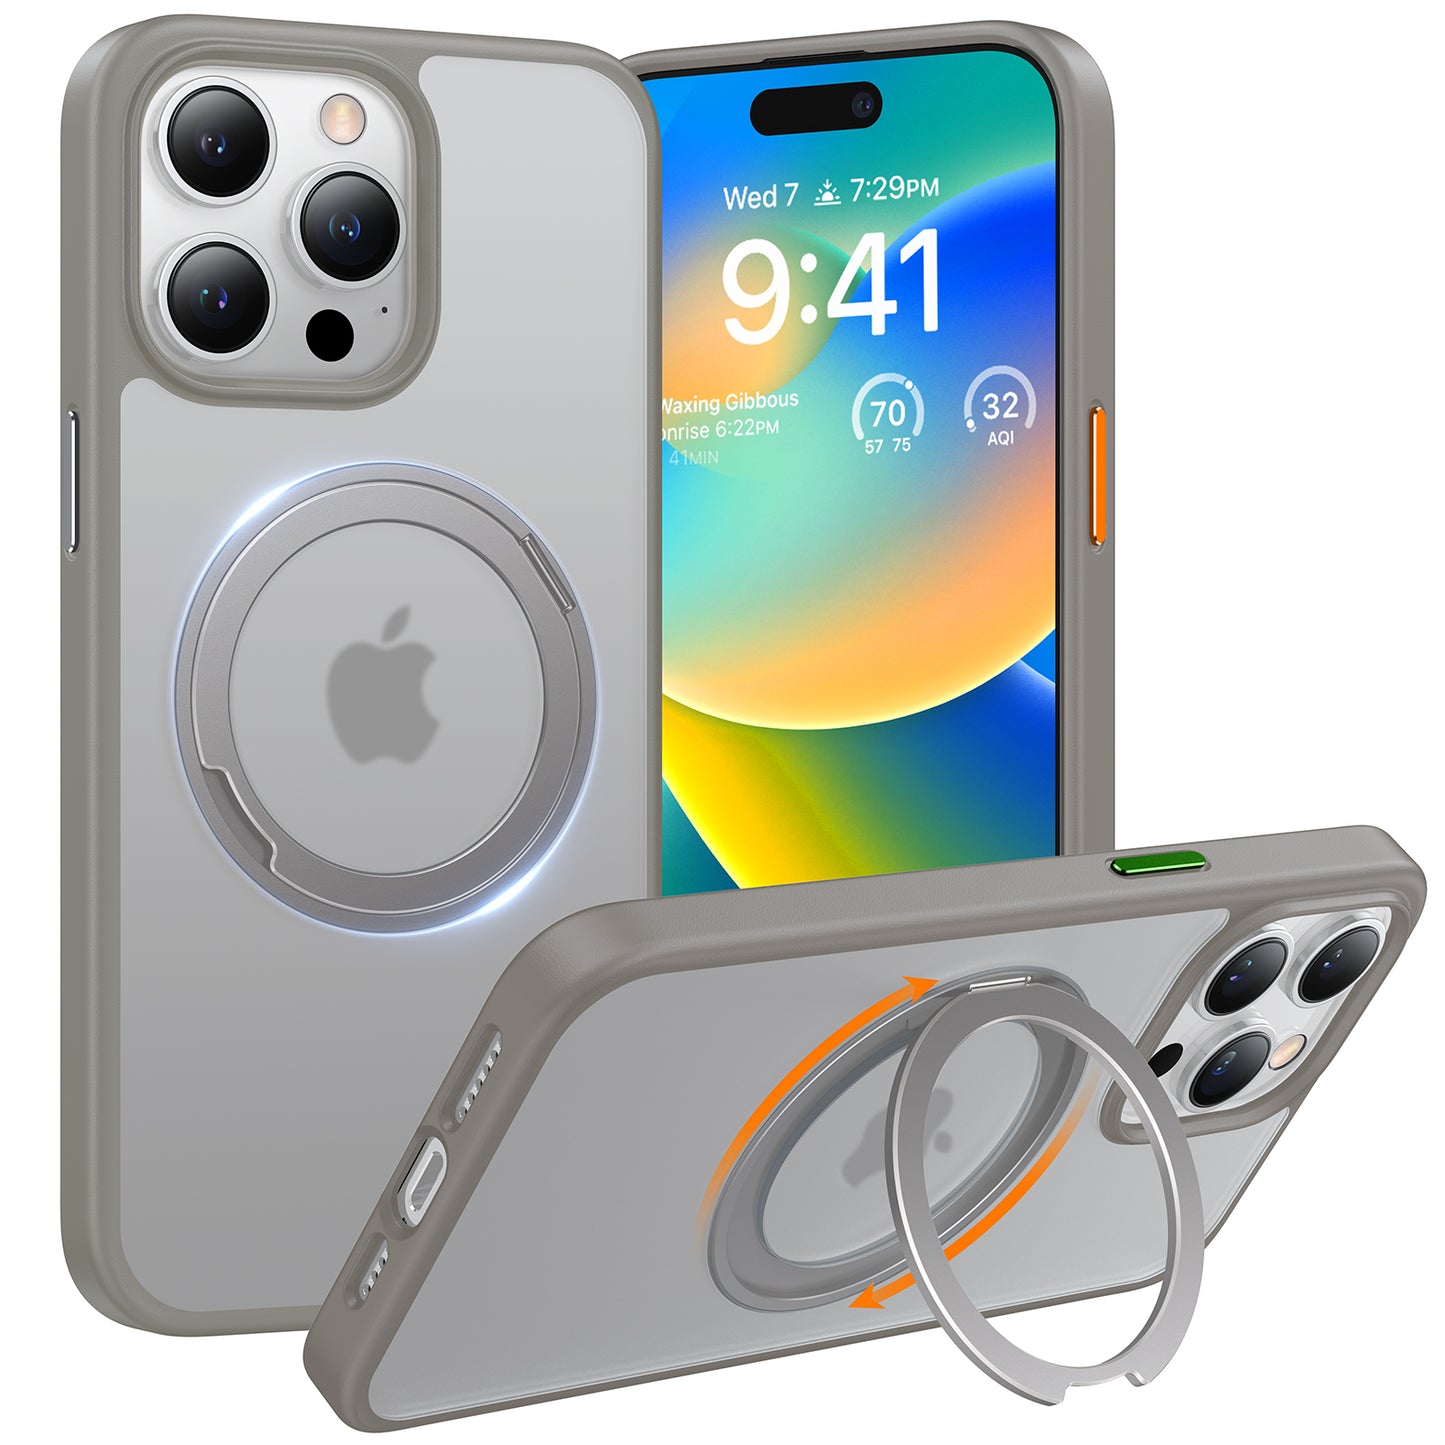 iPhone 15 Series Ostand R Magsafe Case with 360° Rotated Stand